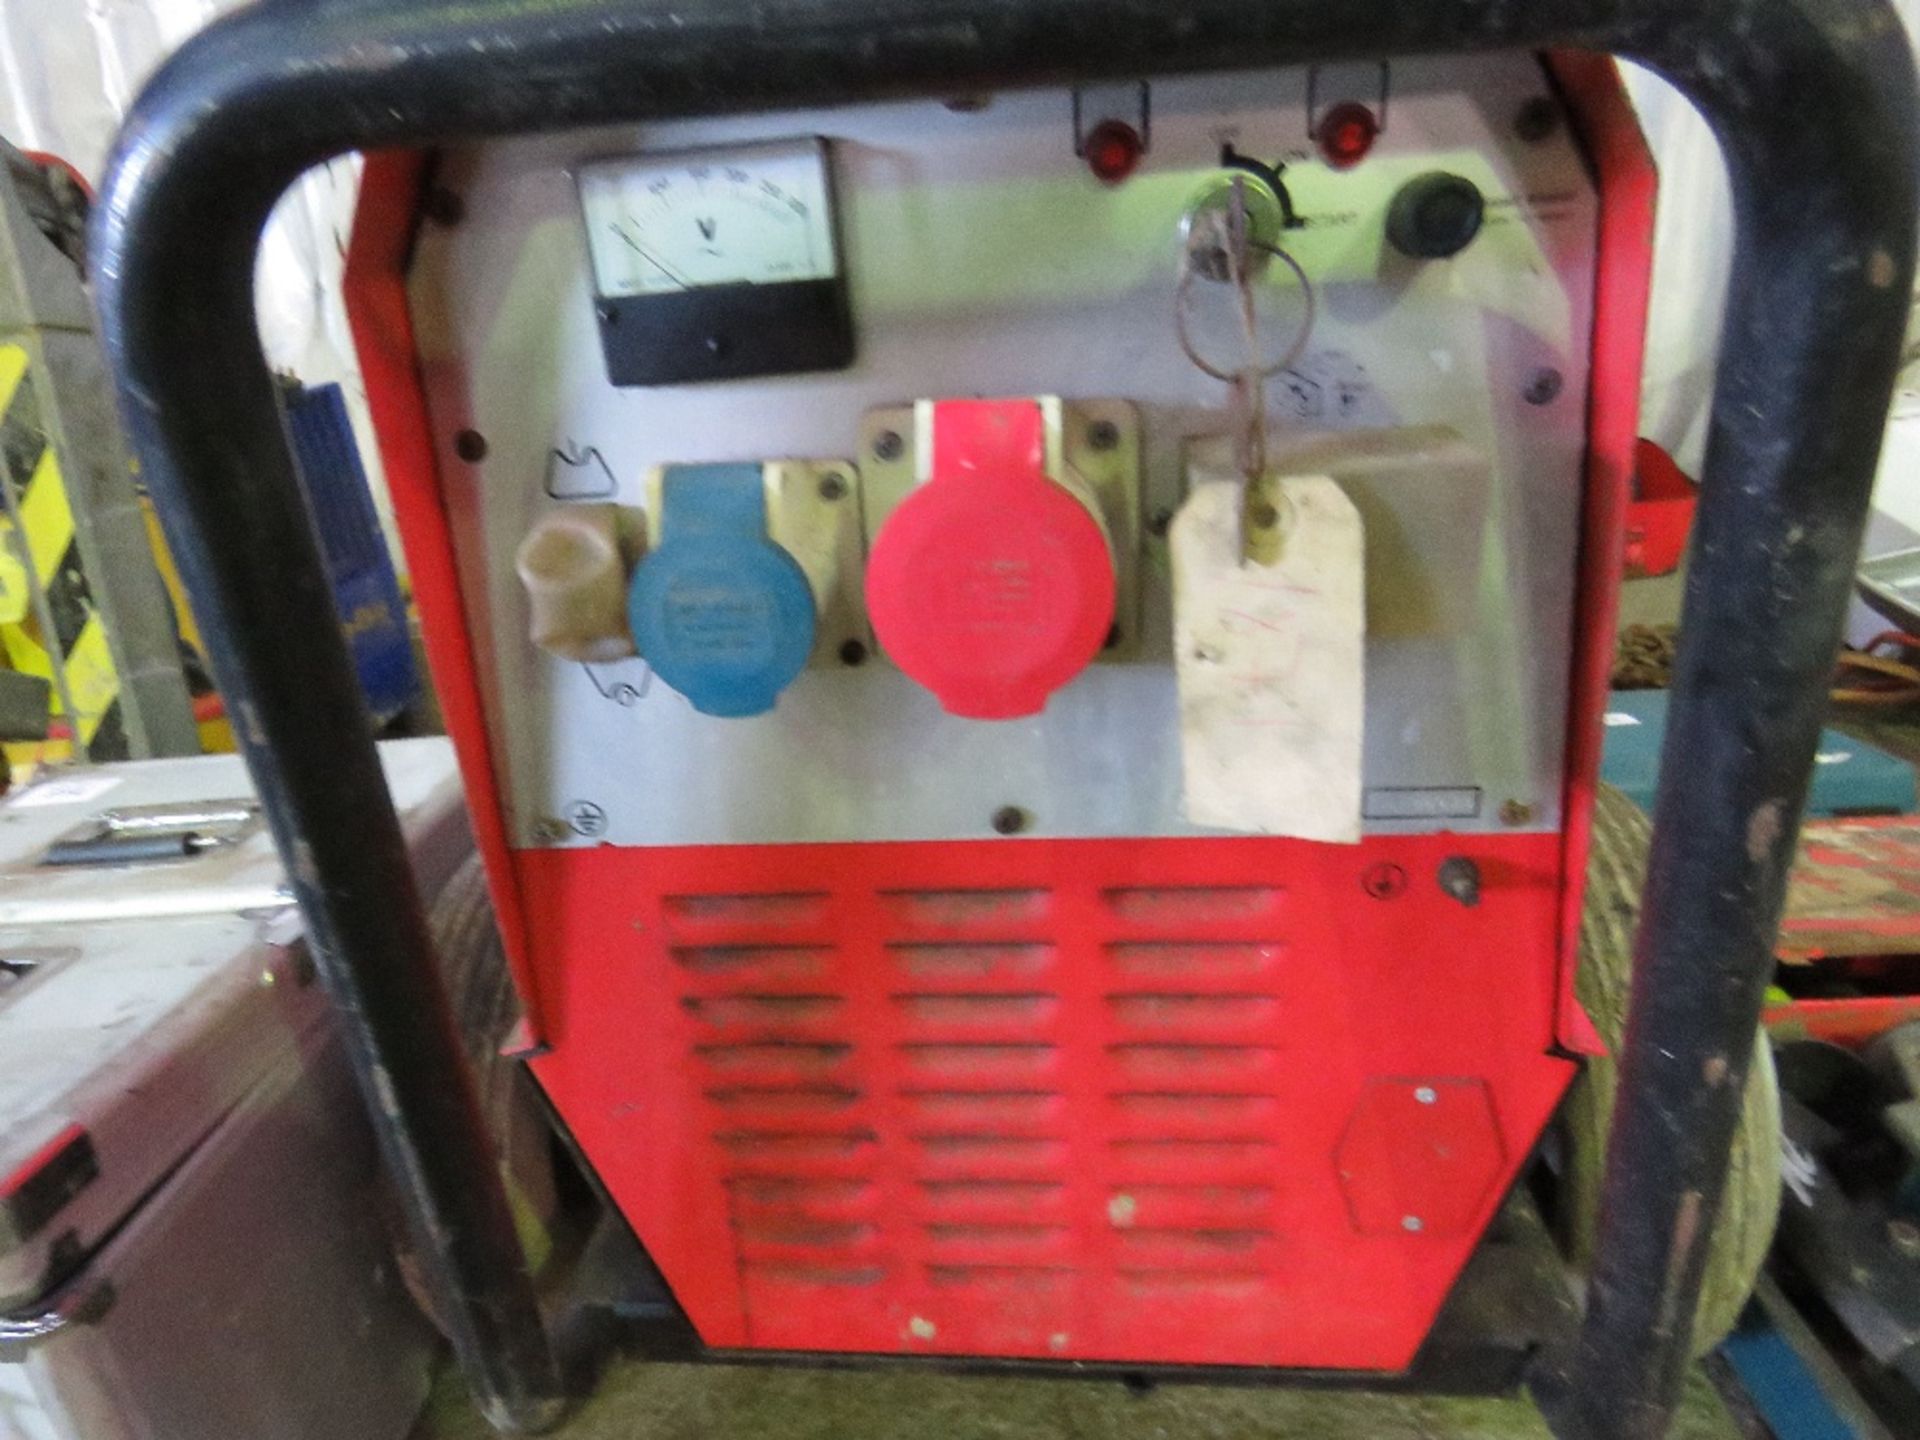 GENSET MG6/5 DIESEL ENGINED GENERATOR. WHEN TESTED WAS SEEN TO RUN, OUTPUT NOT TESTED. - Image 2 of 4